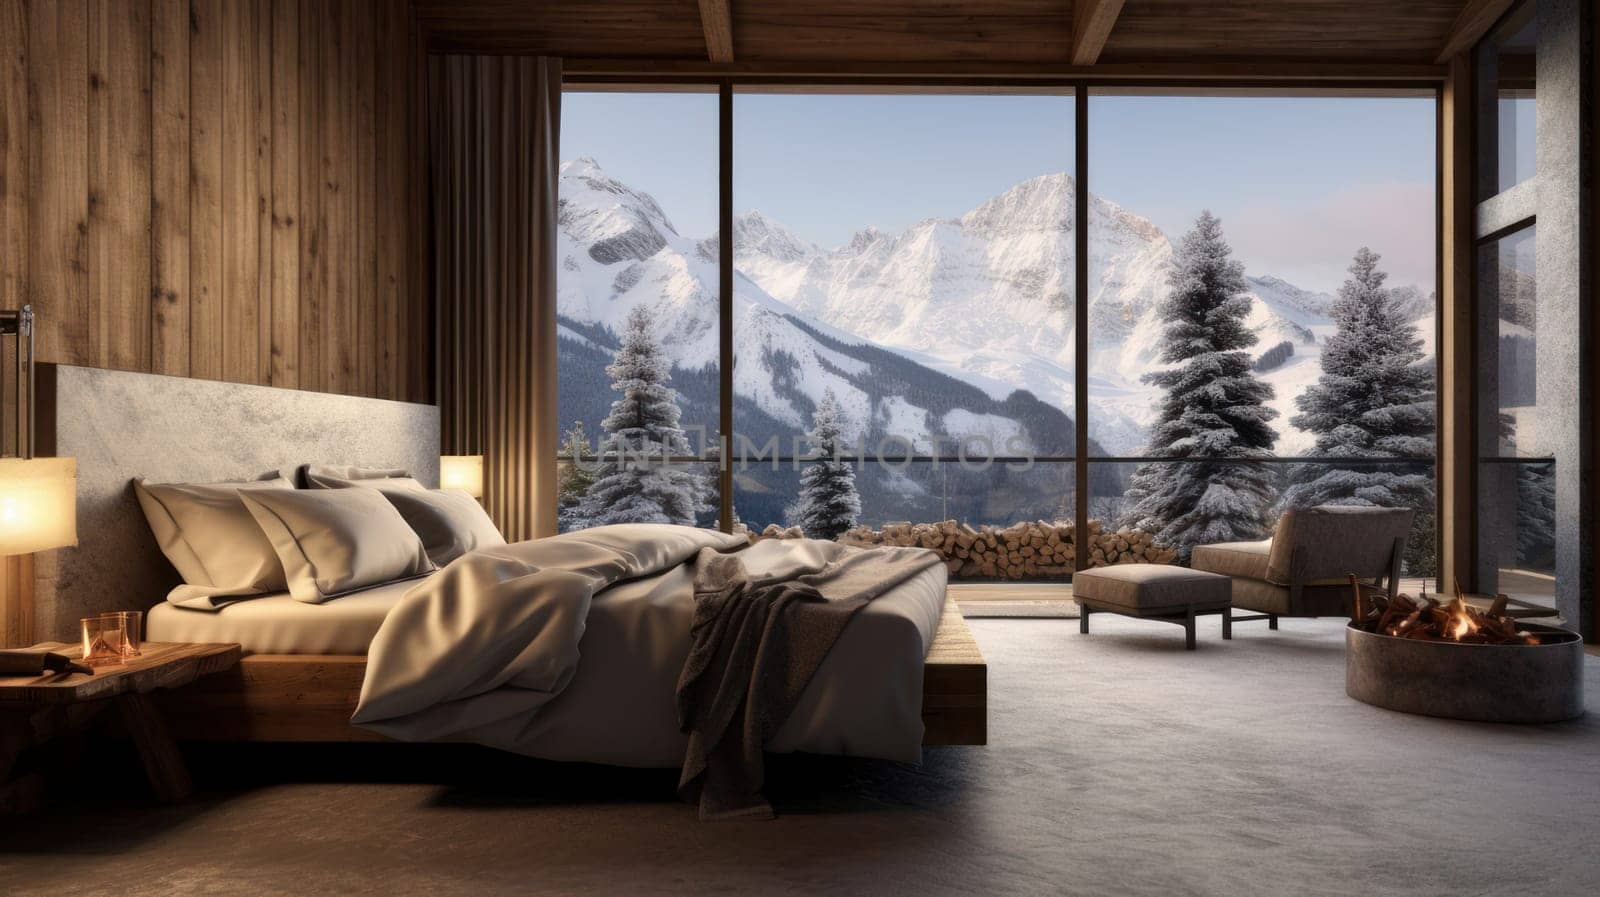 Bedroom in a luxury hotel in the middle of winter and mountains by Alla_Yurtayeva